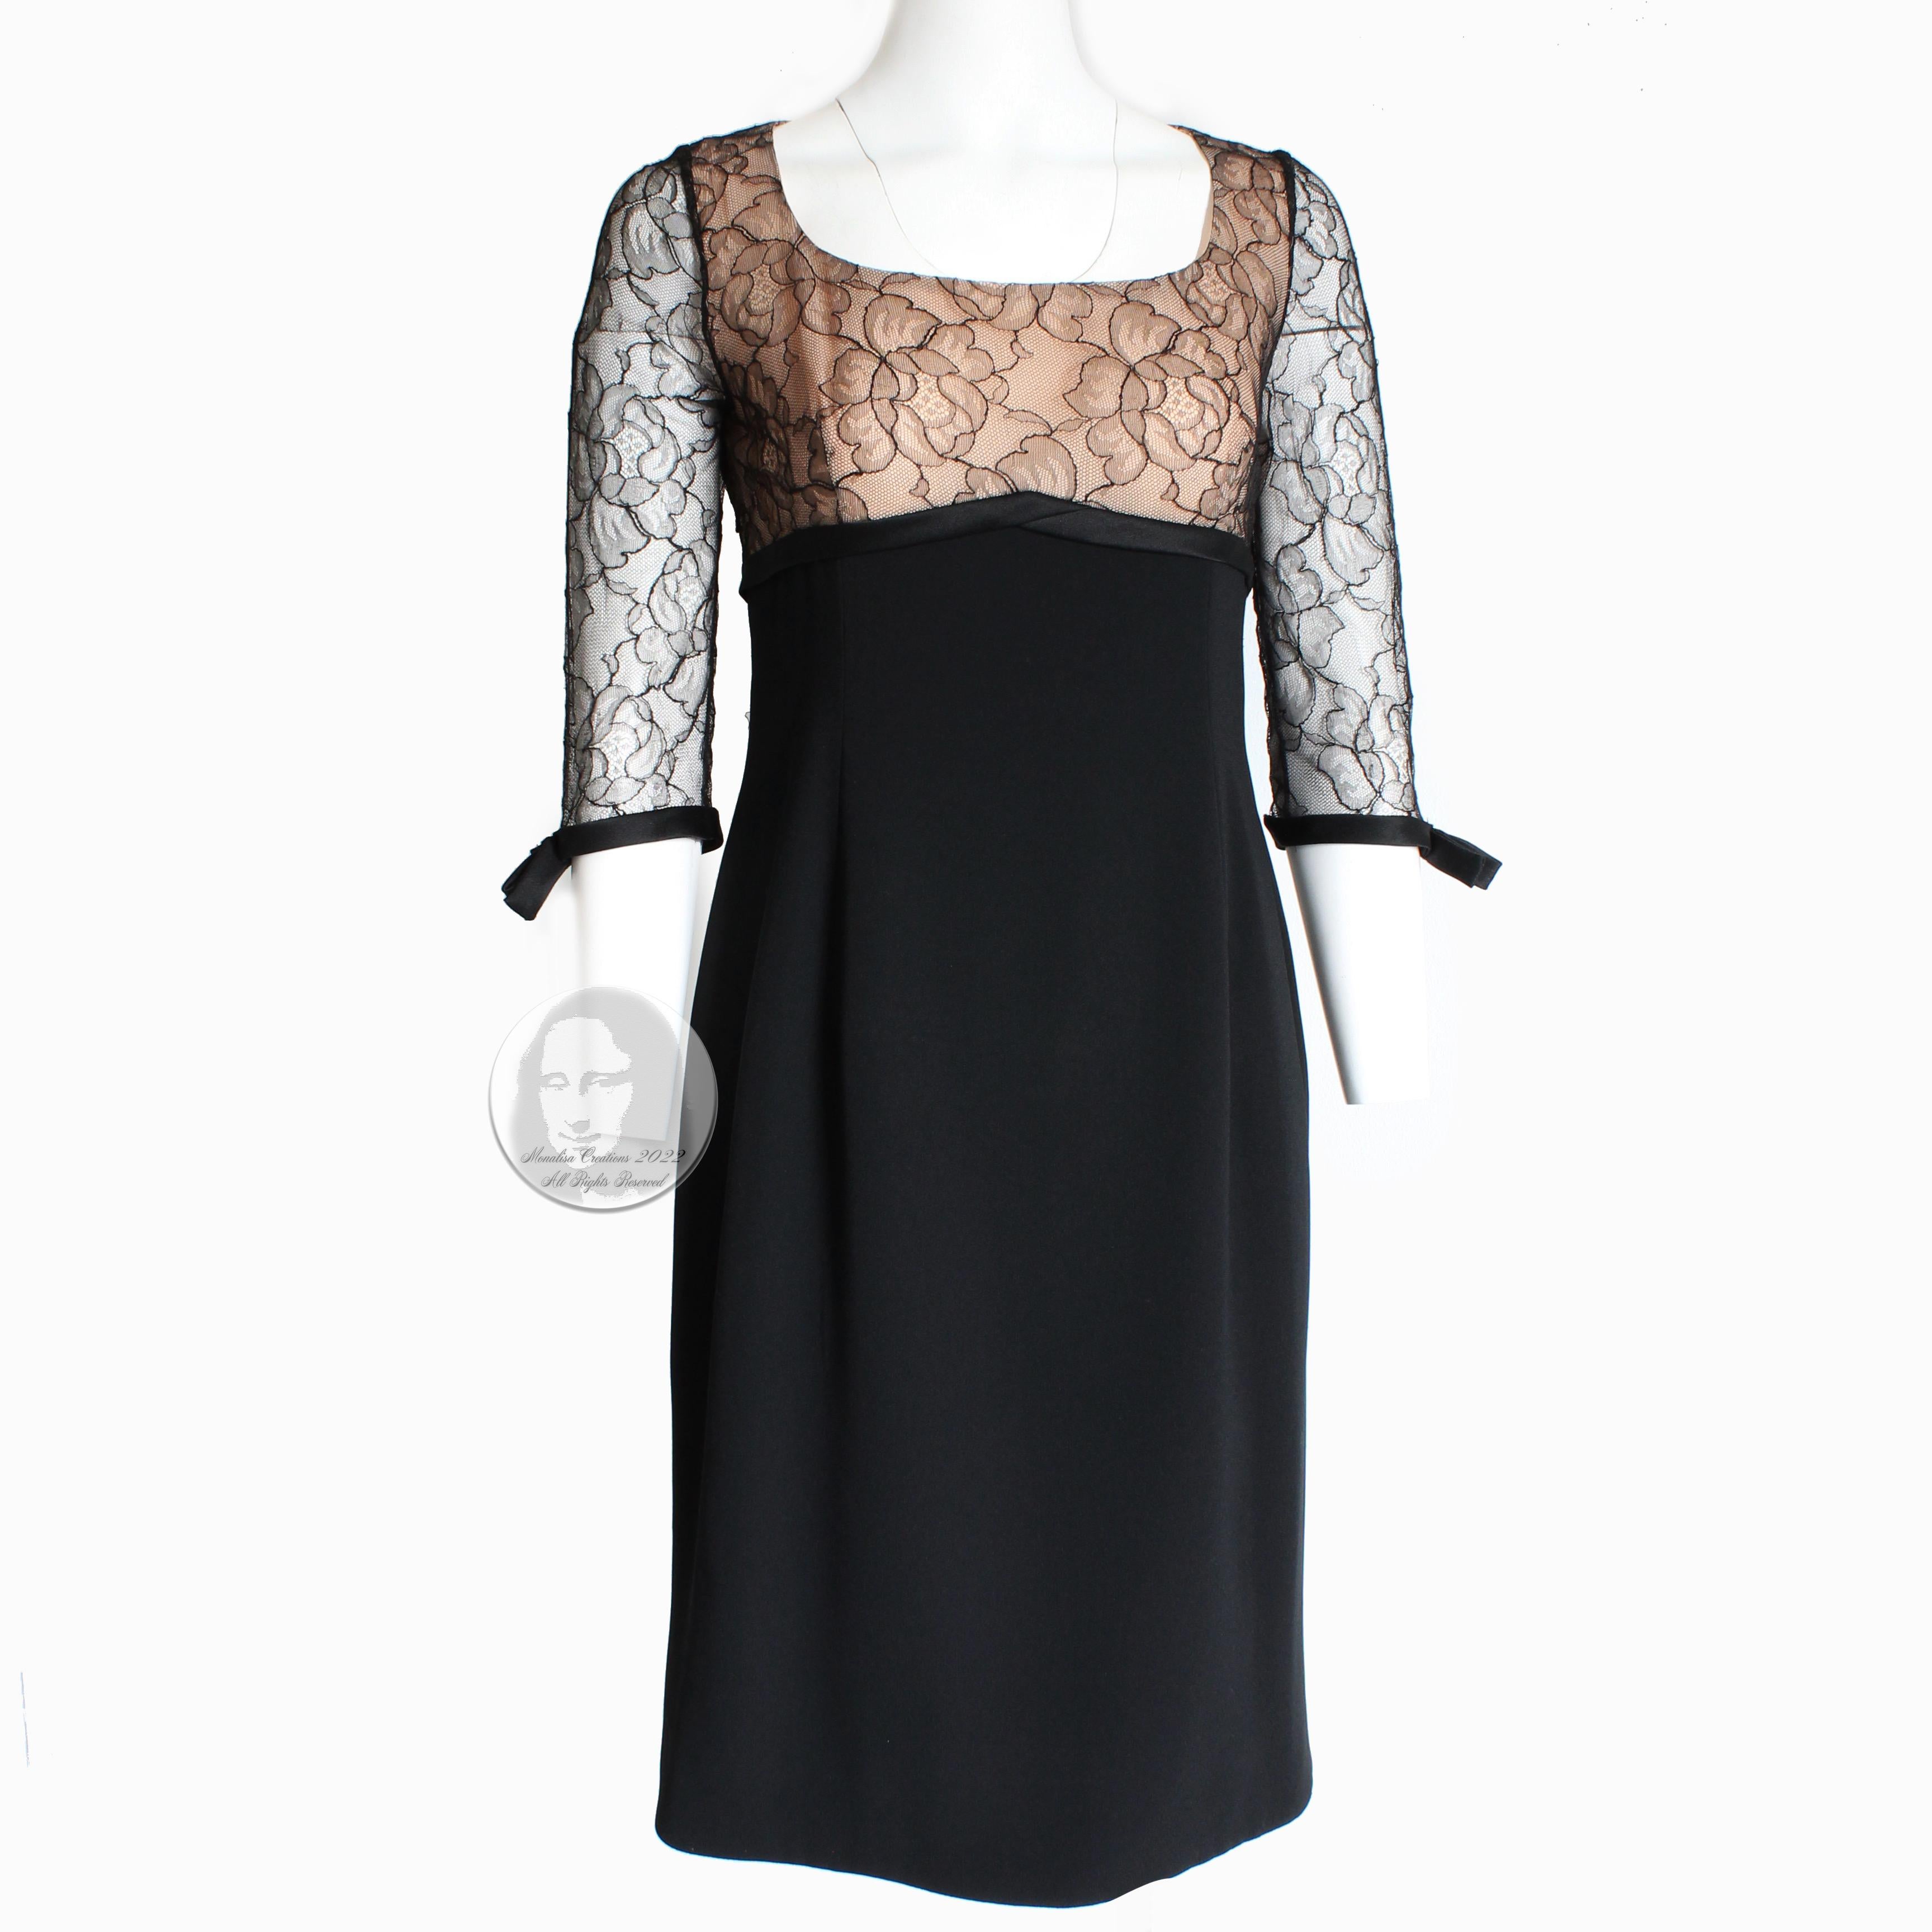 Here's a pretty cocktail dress from Travilla, most likely made in the 1960s. Made from what we suspect is a silk/wool blend fabric, it features an illusion lace bodice, sheer lace half sleeves and black silk satin ribbon detailing at the waist and